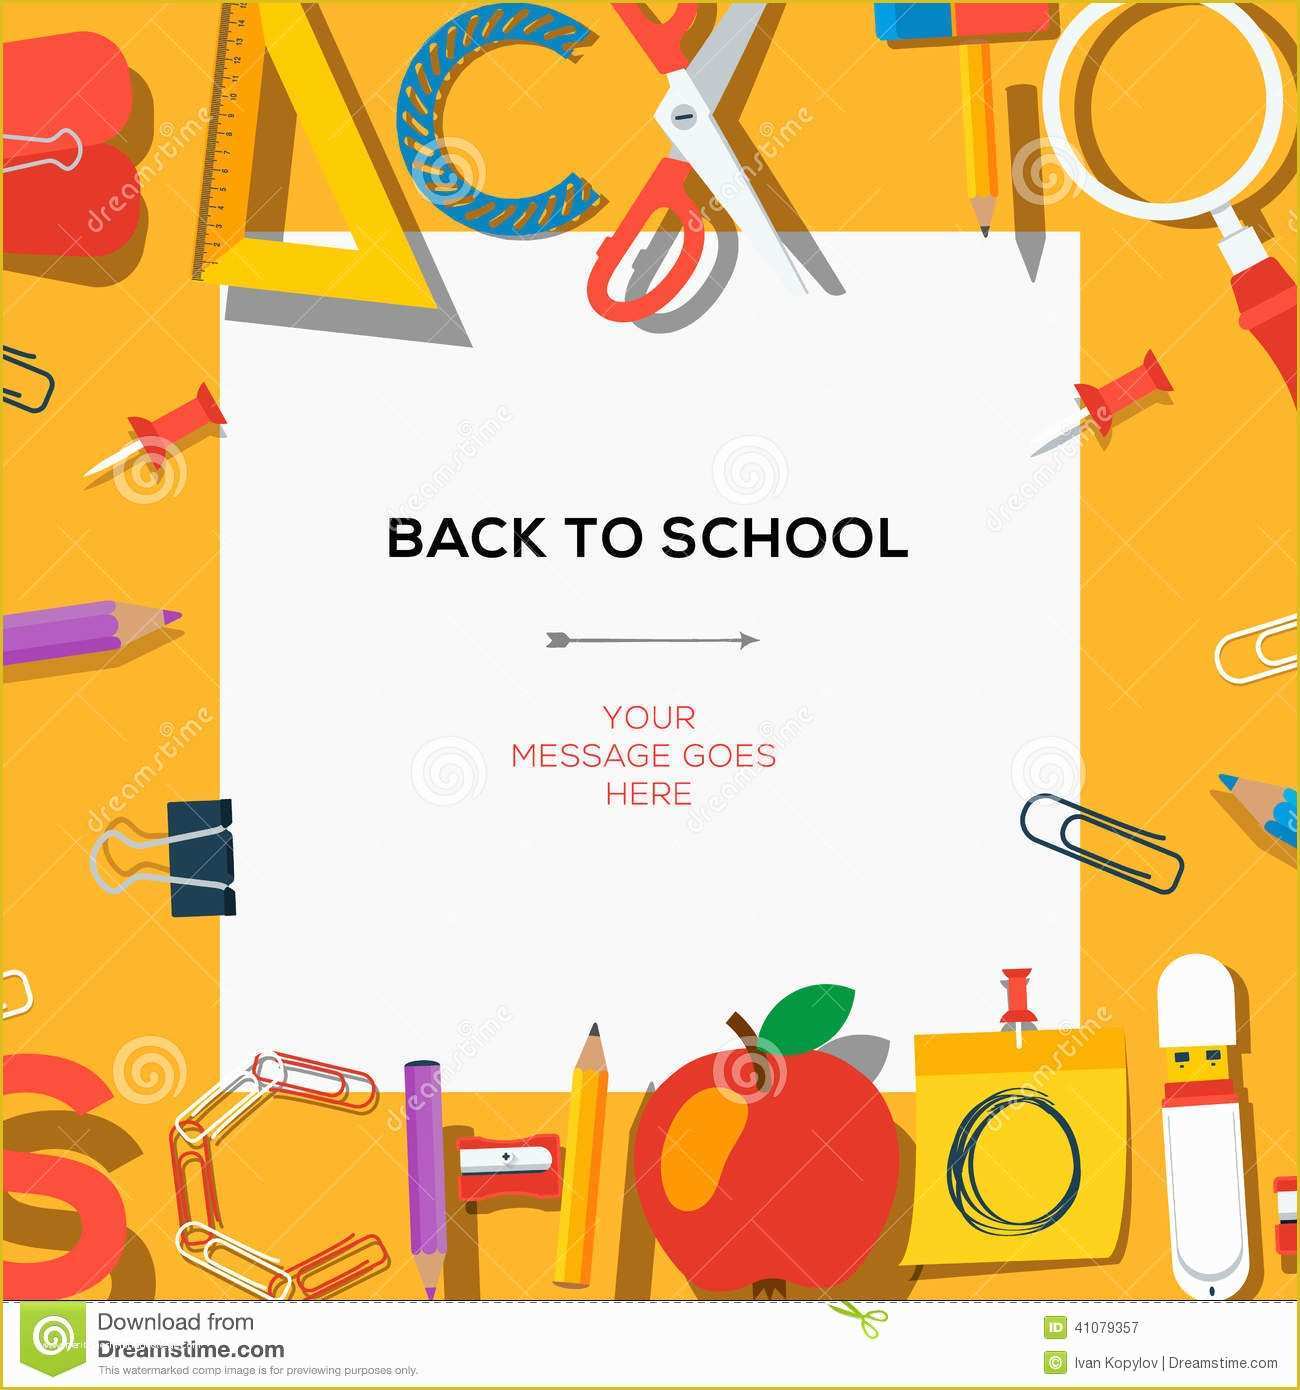 School Photo Templates Free Of Back to School Template with Supplies Stock Vector